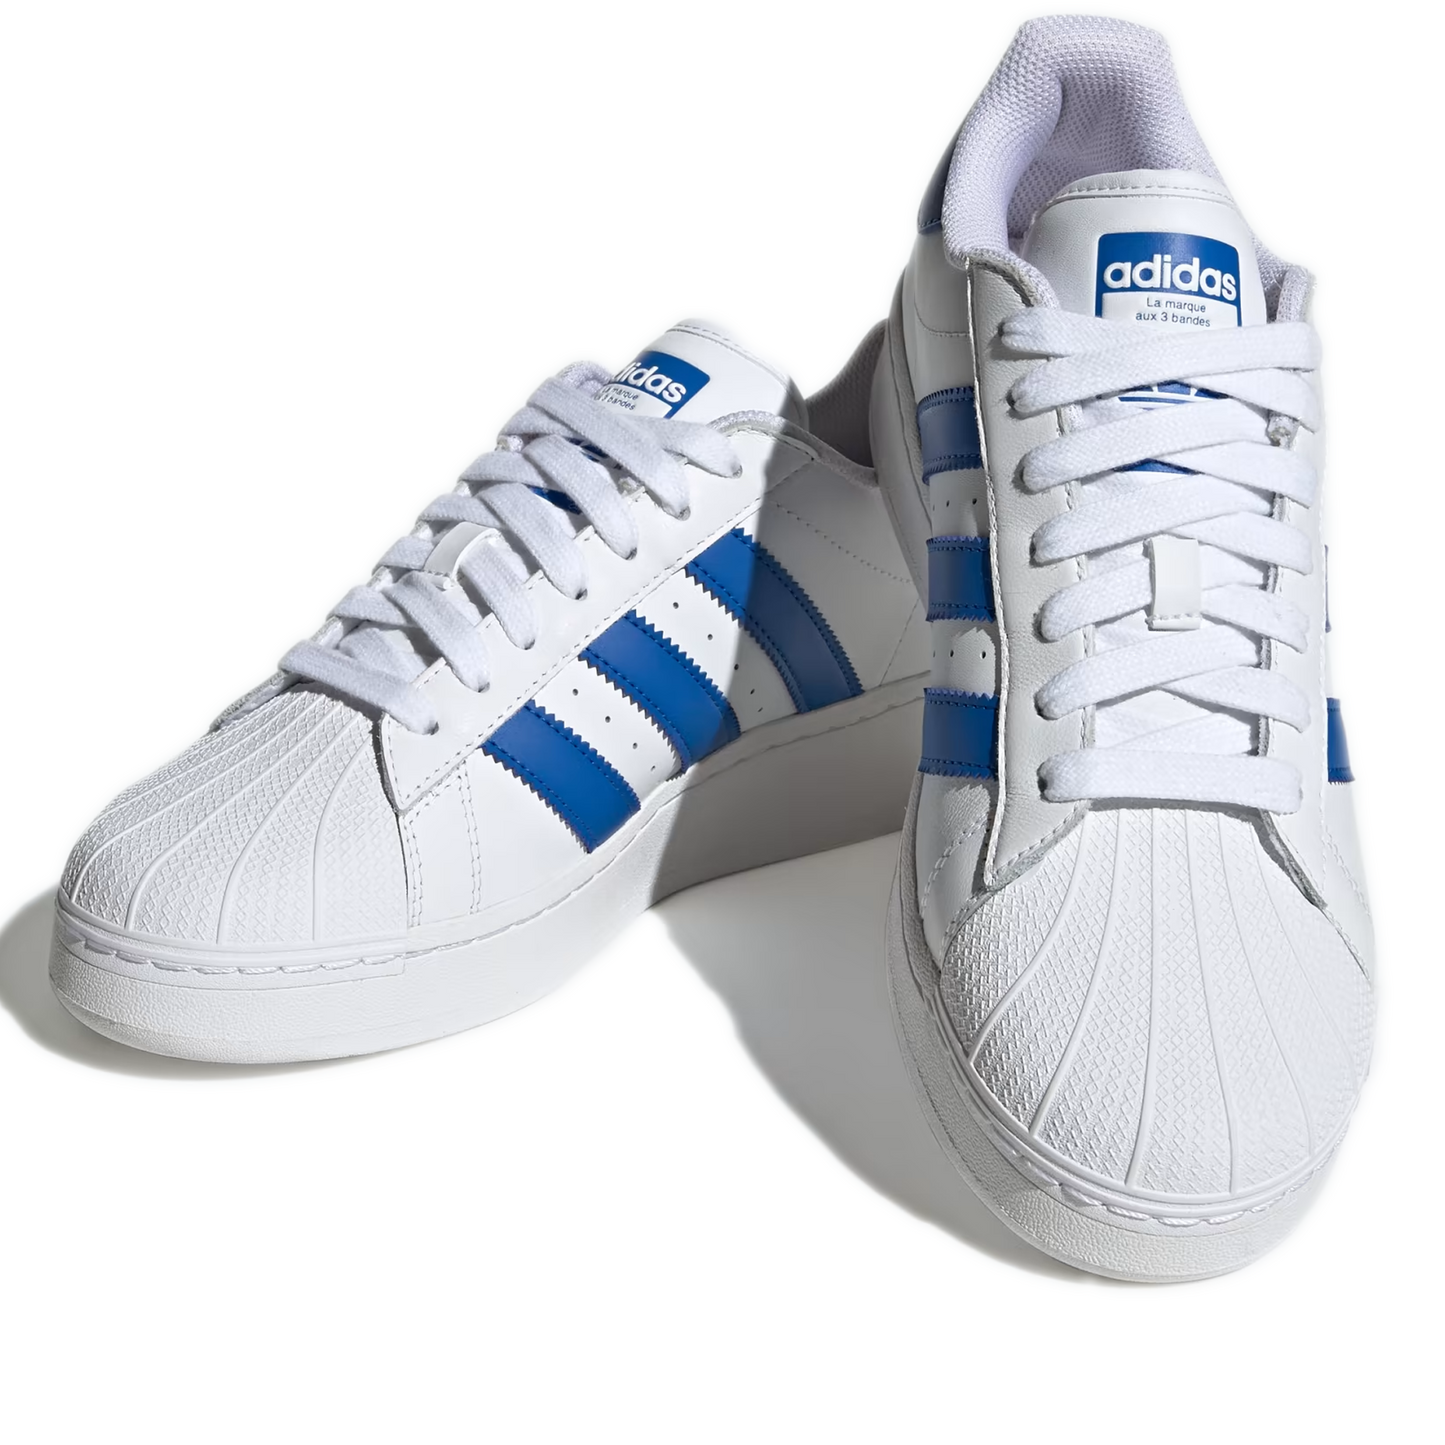 Men's Adidas Superstar XLG Shoes - White/ Blue